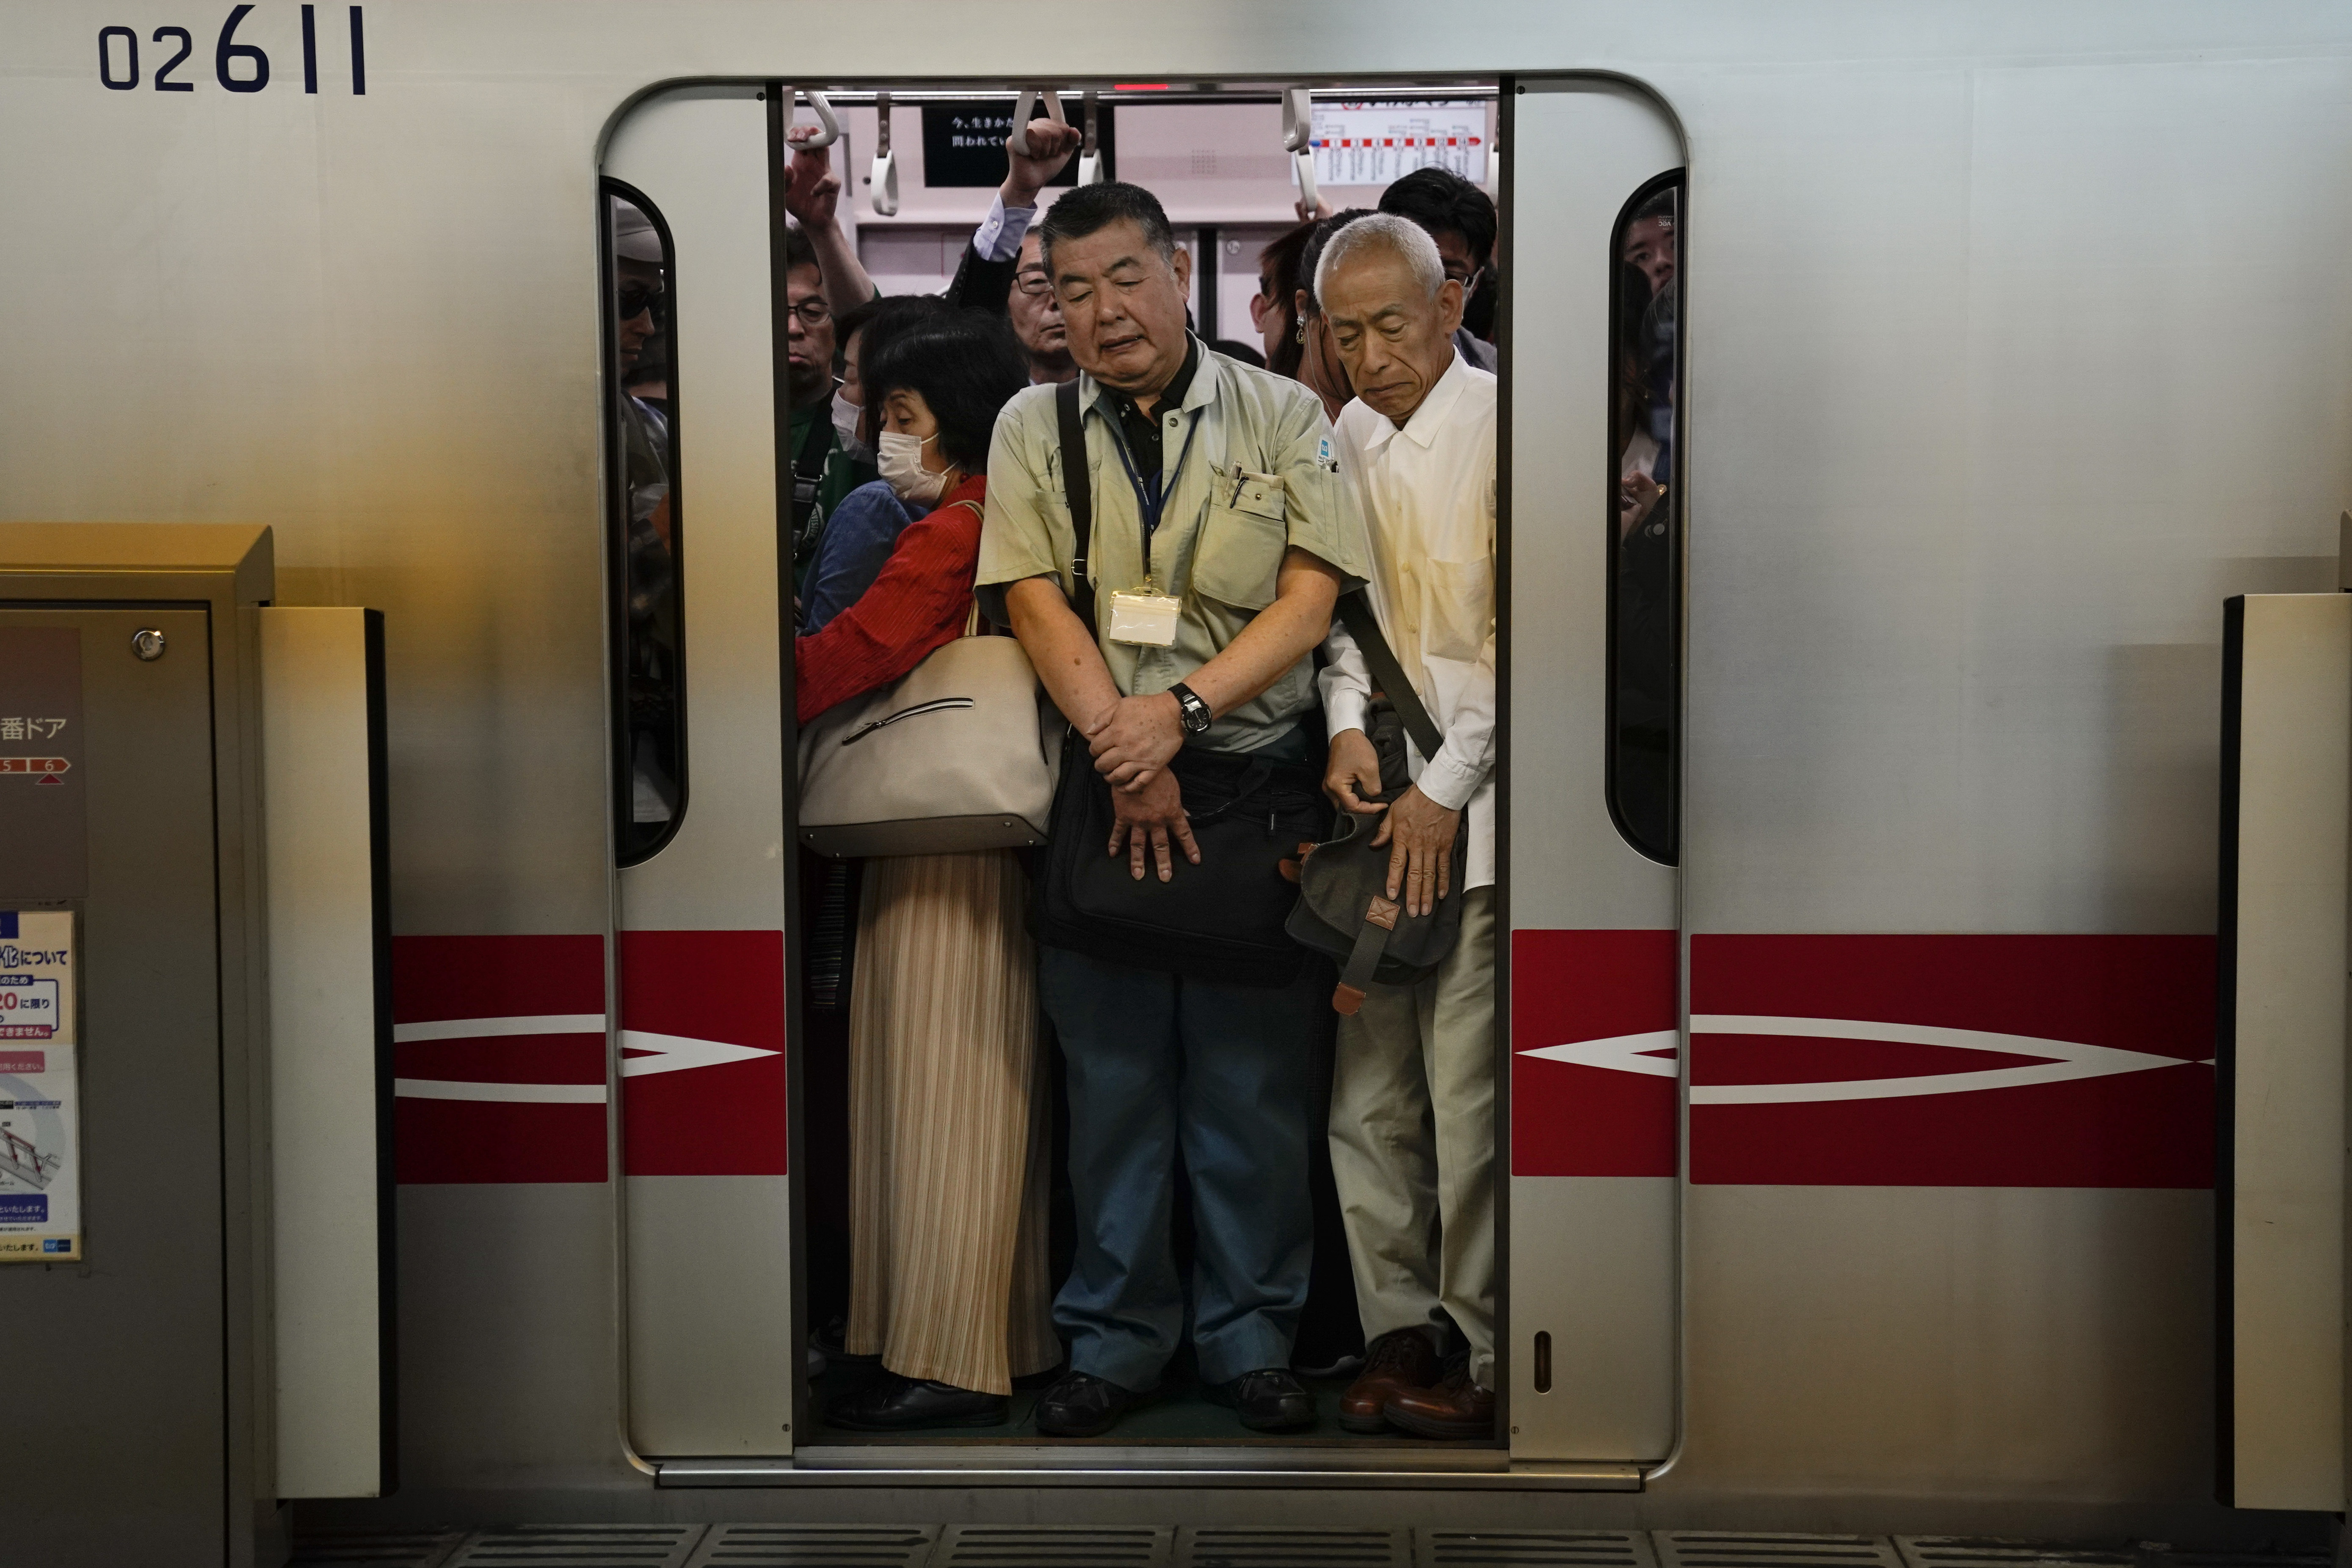 People stand pressed against each other in a commuter train as train doors close at Shinjuku Station, Saturday, May 18, 2019, in Tokyo. (AP Photo/Jae C. Hong)